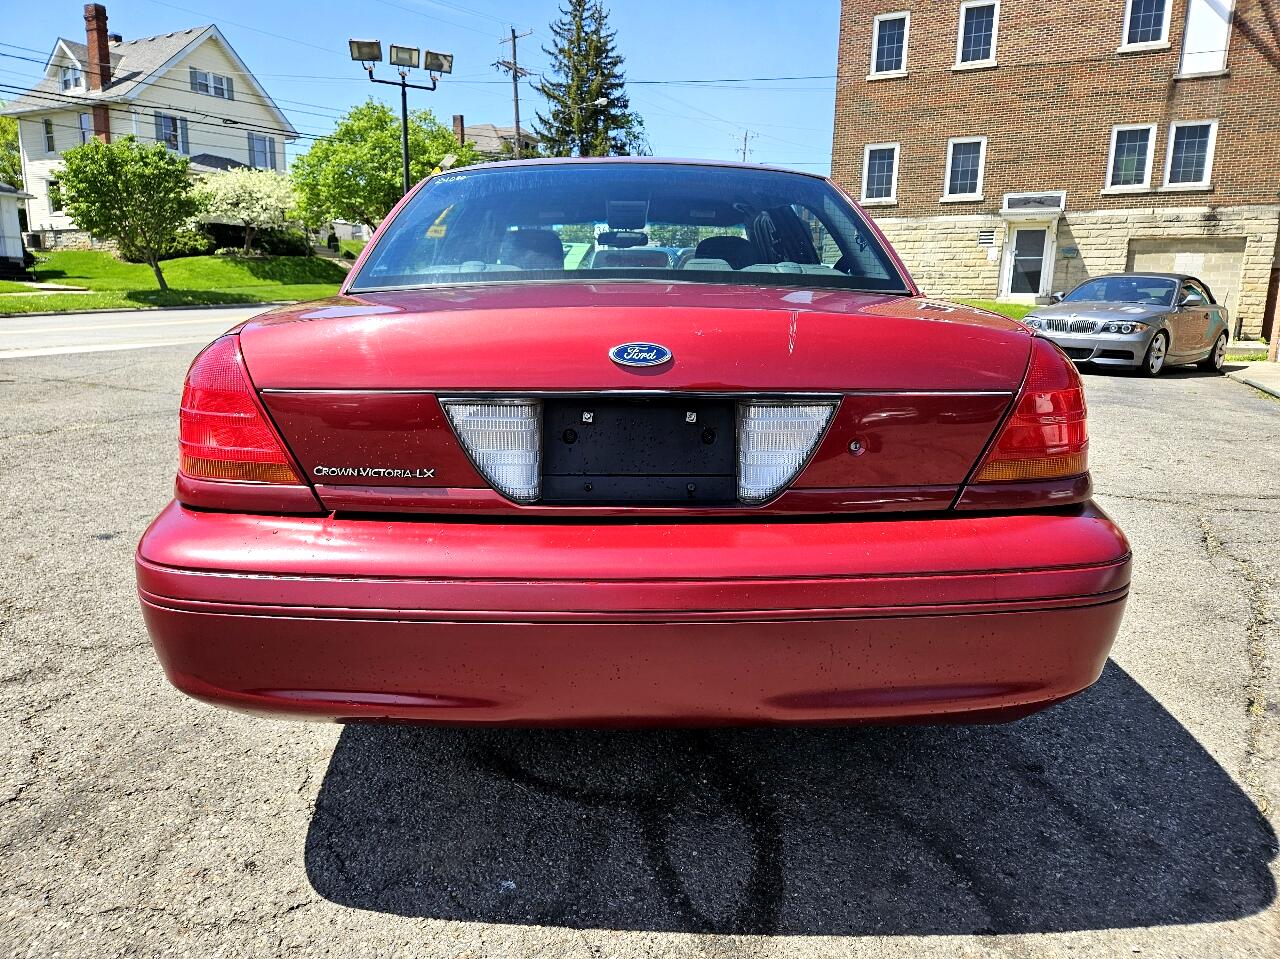 2003 Ford Crown Victoria LX 8